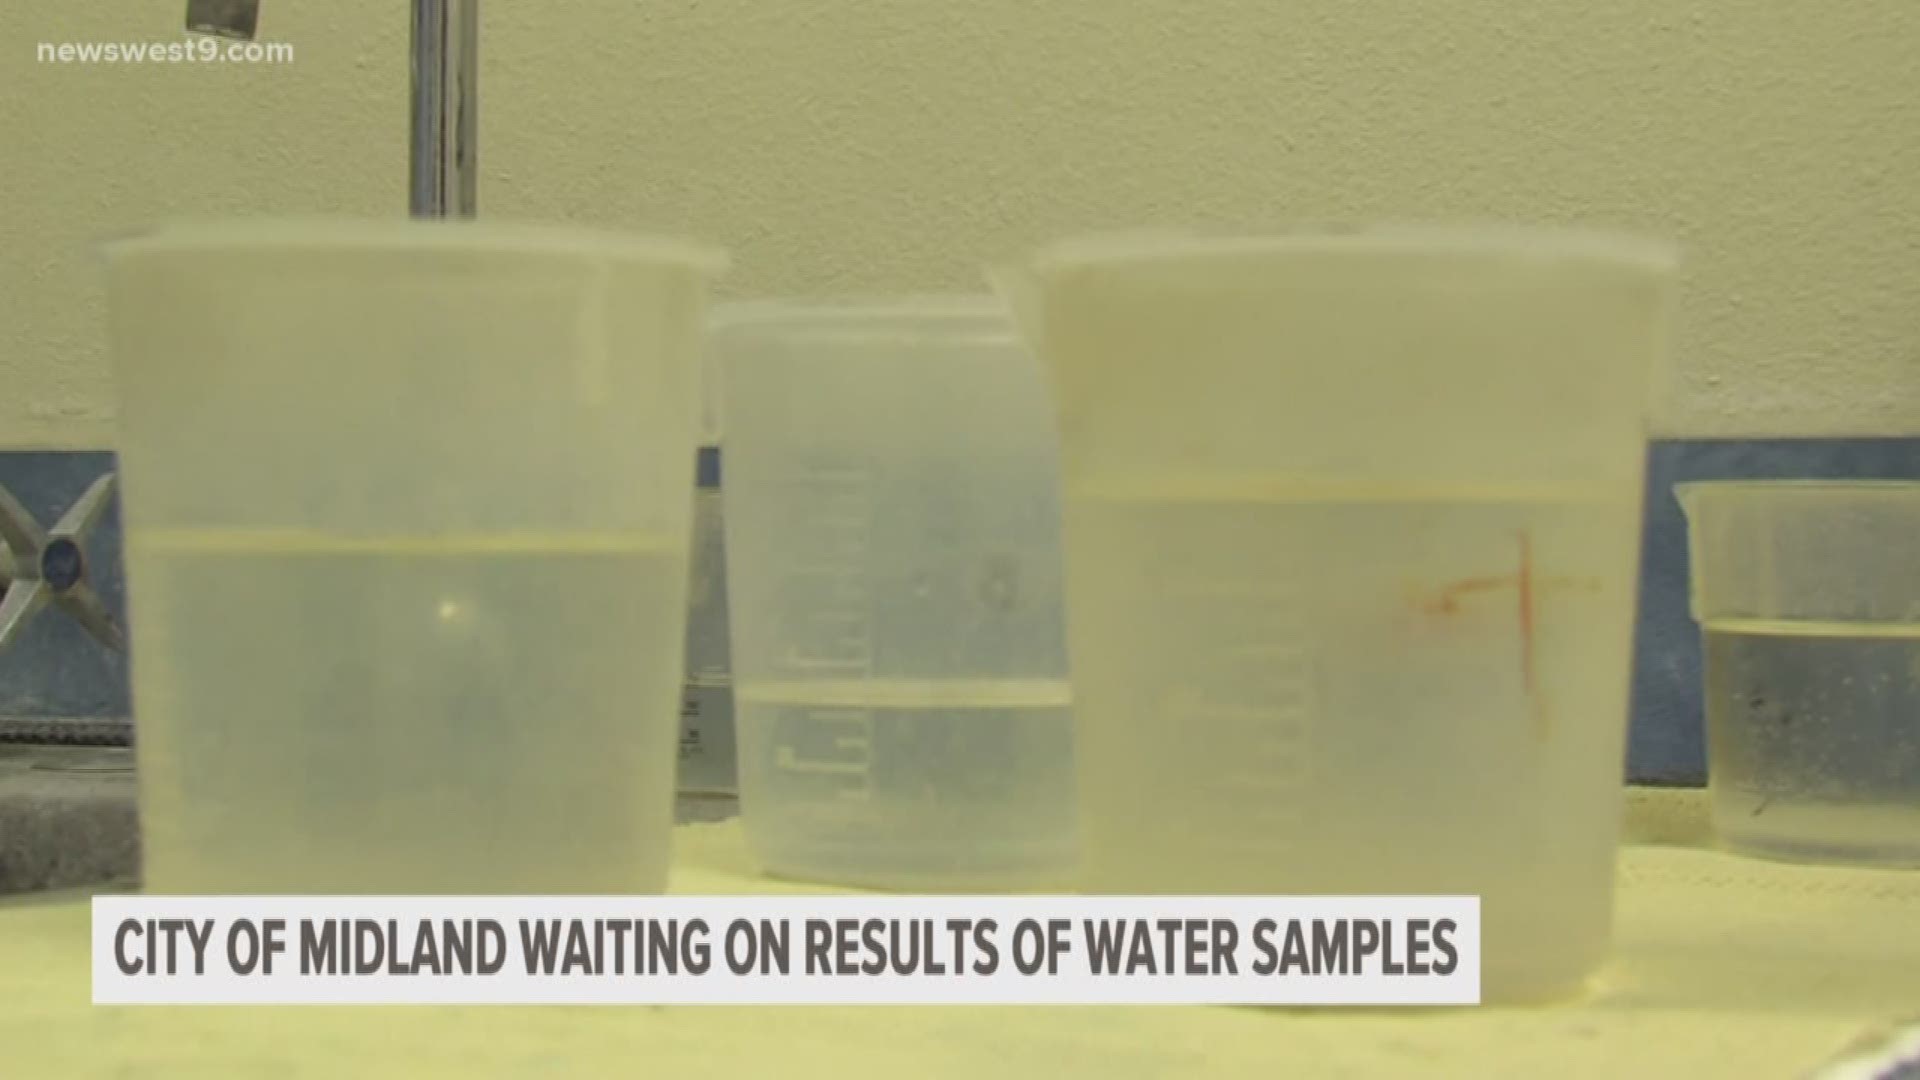 Parents hired a private company to test the water at Fannin Elementary and those results claim there are high levels of iron, lead, and arsenic.